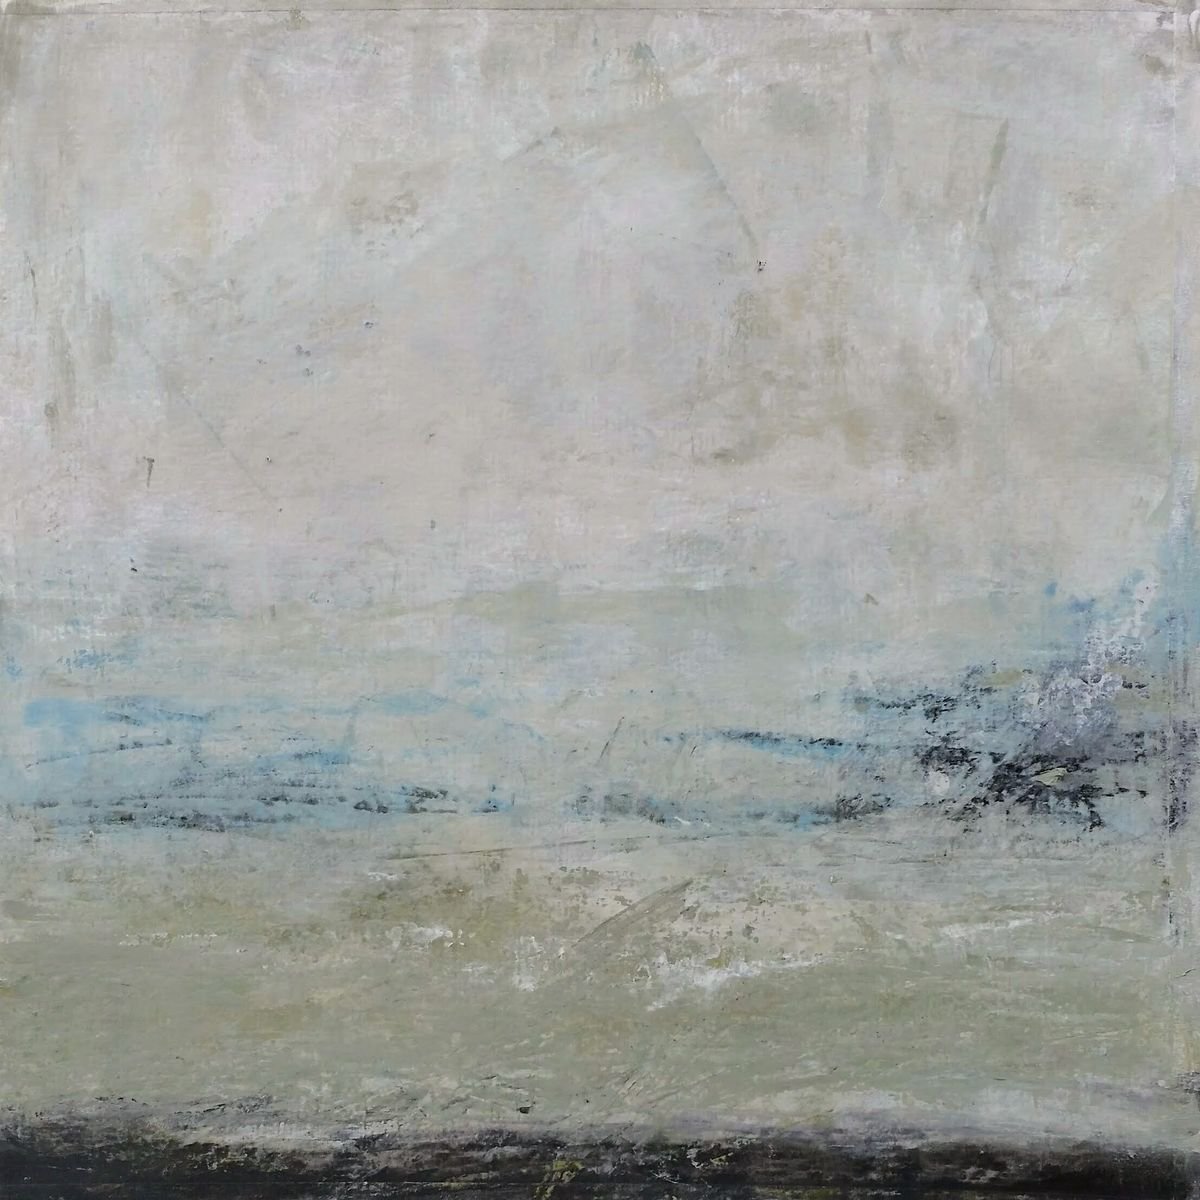 Seascape (Seascape Series) by Jane Efroni by Jane Efroni